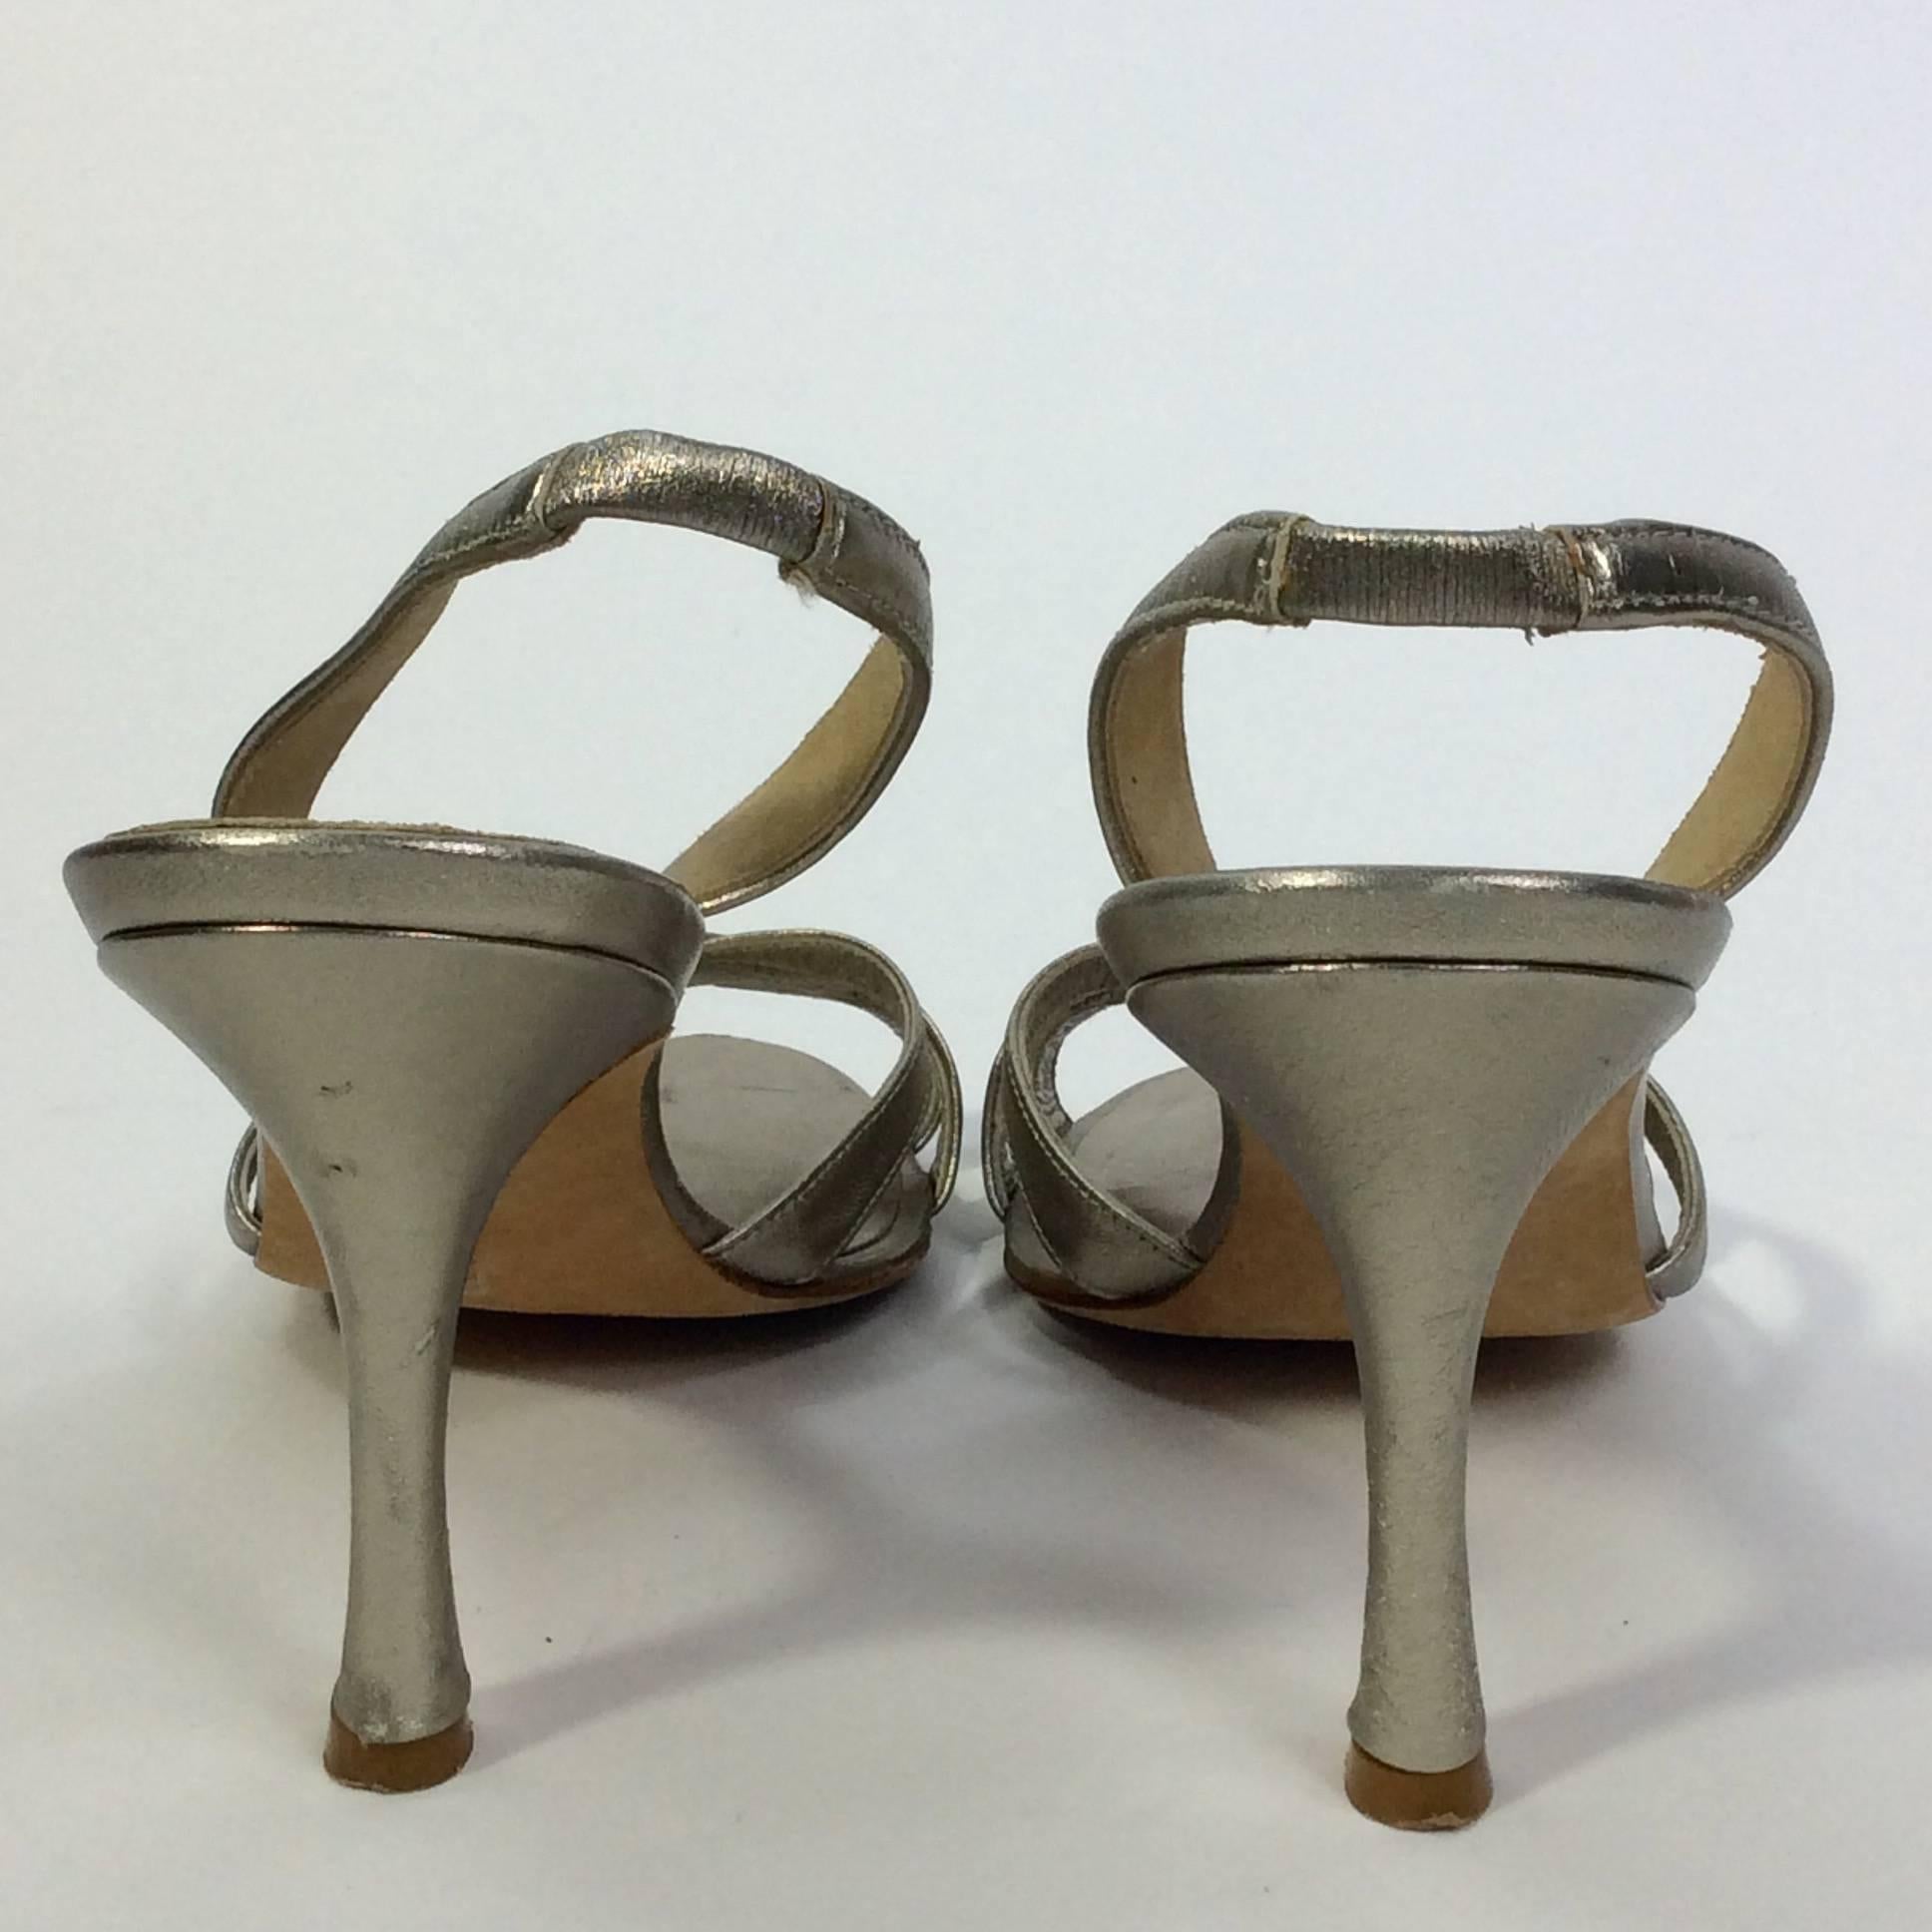 Manolo Blahnik Gold Strap Slingback Sandal In Excellent Condition For Sale In Narberth, PA